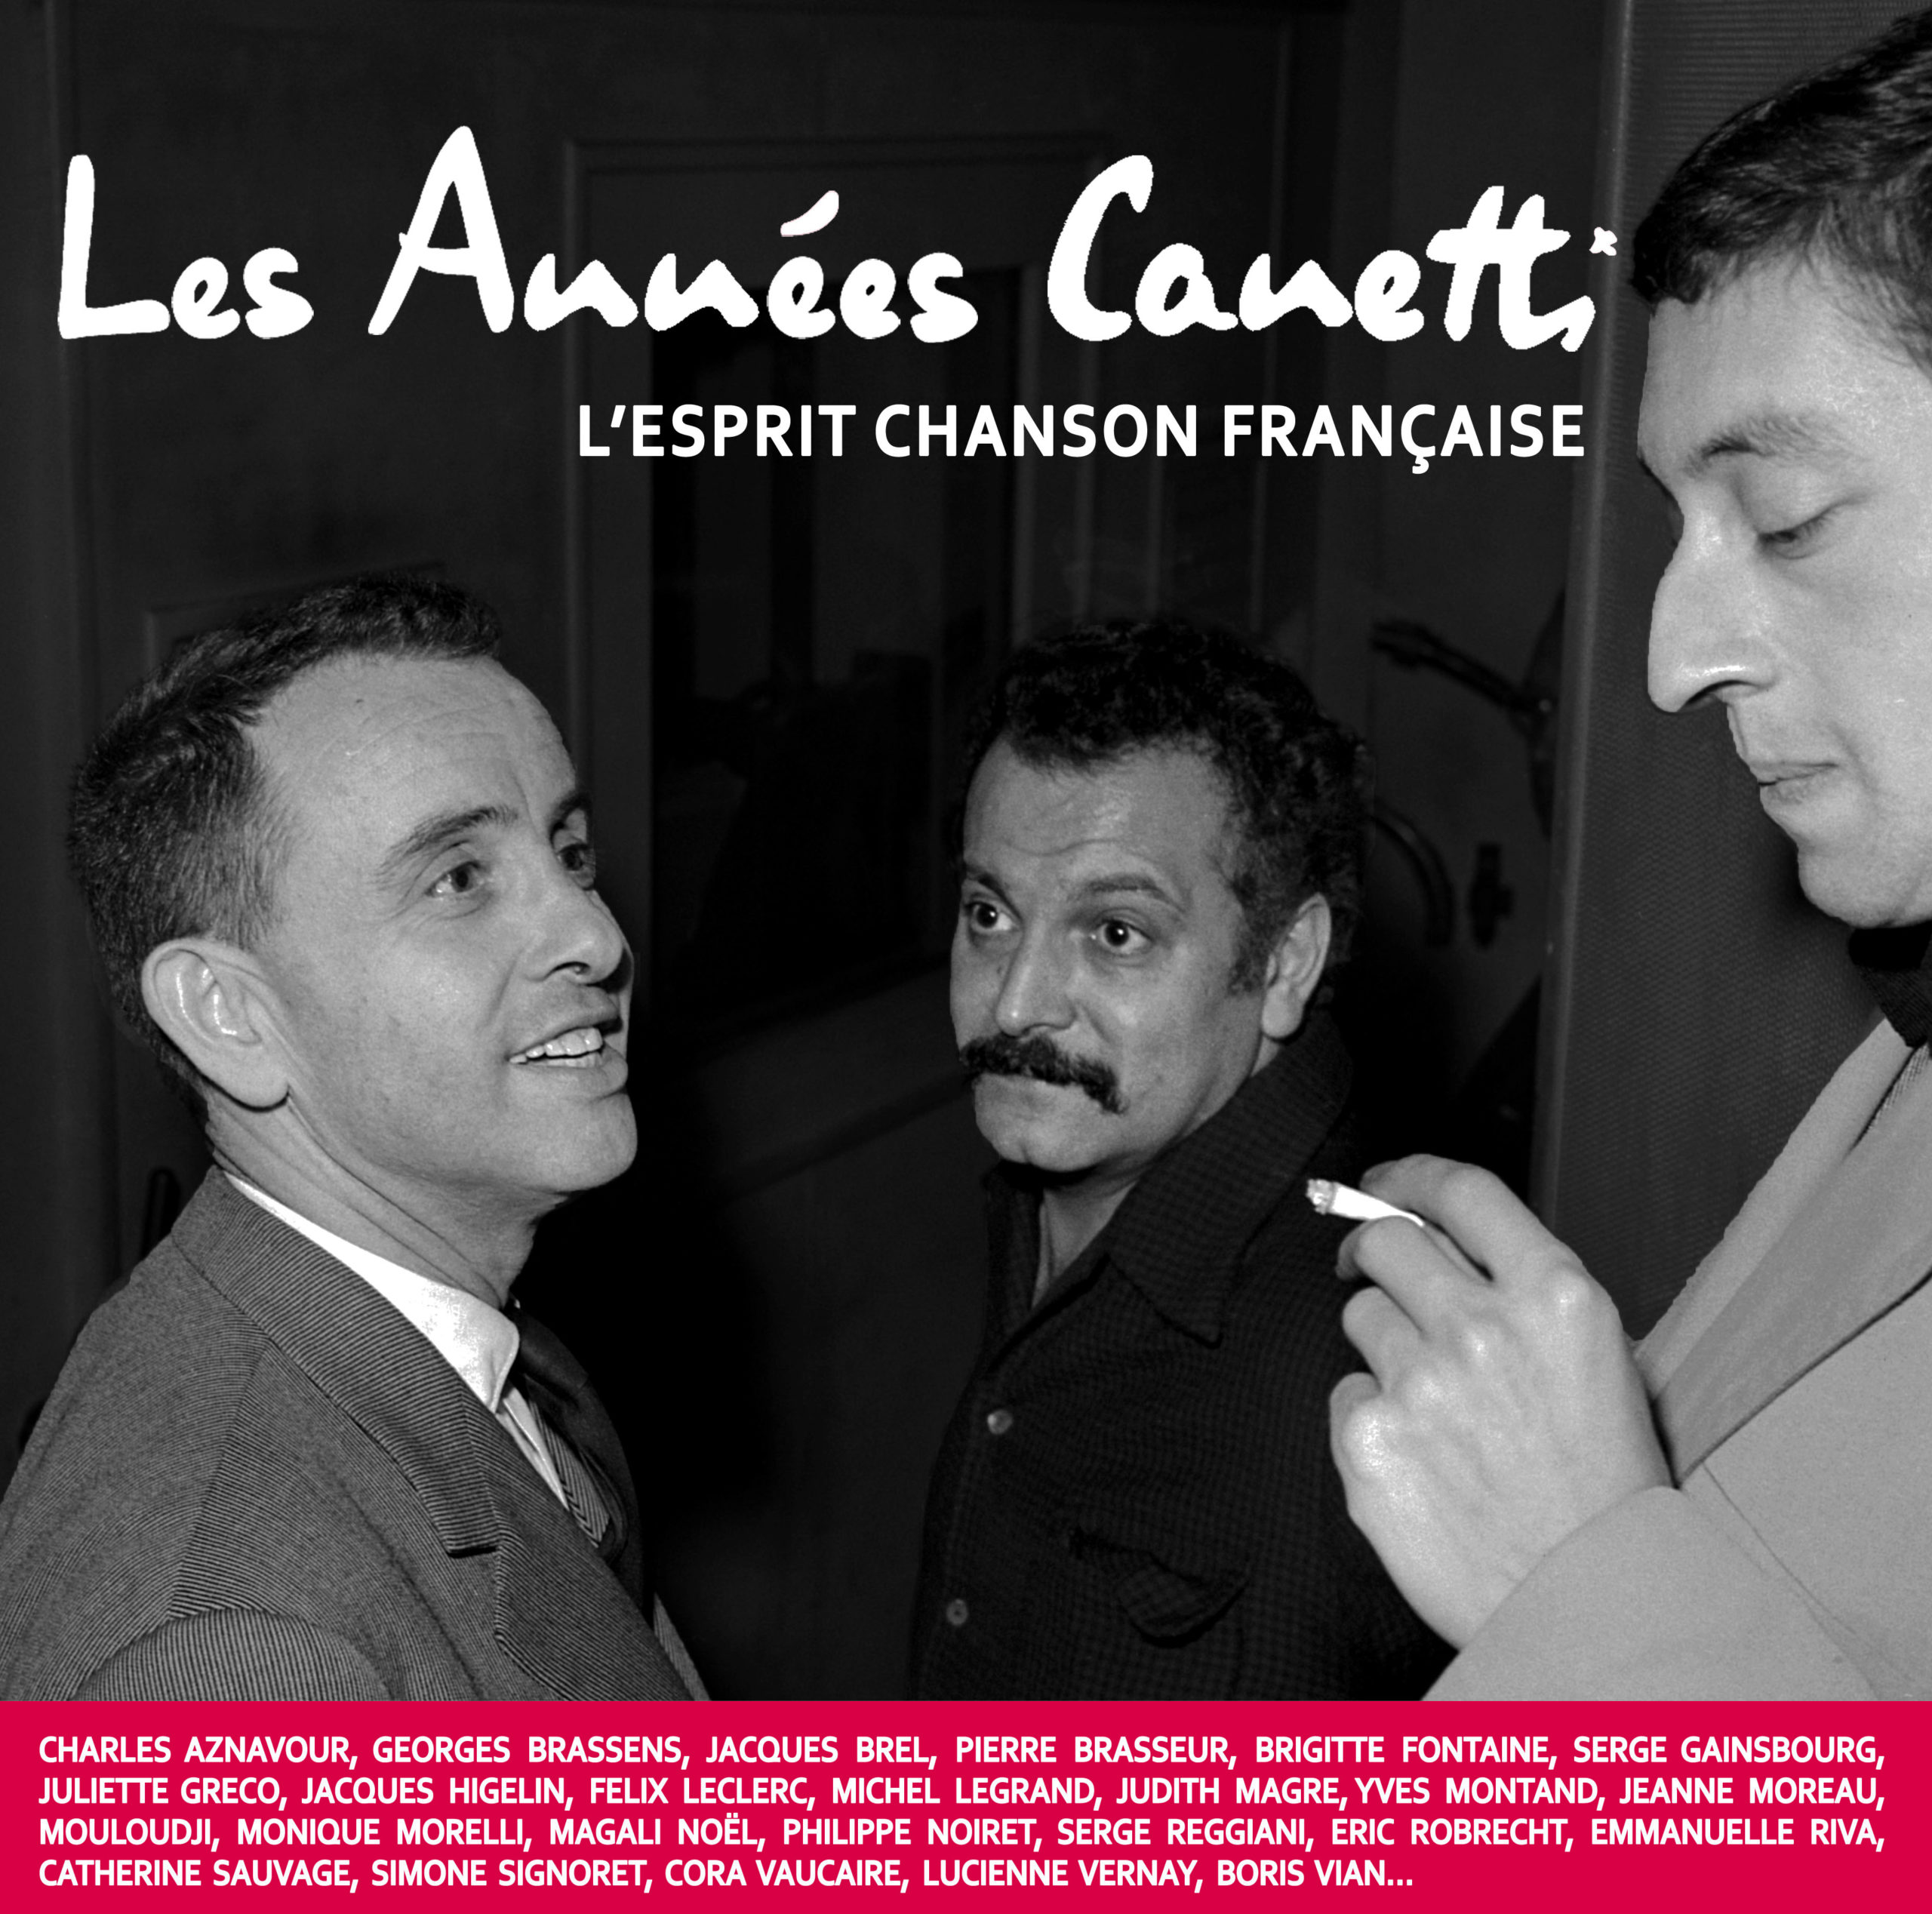 LES ANNEES CANETTI vinyle - Productions Jacques Canetti